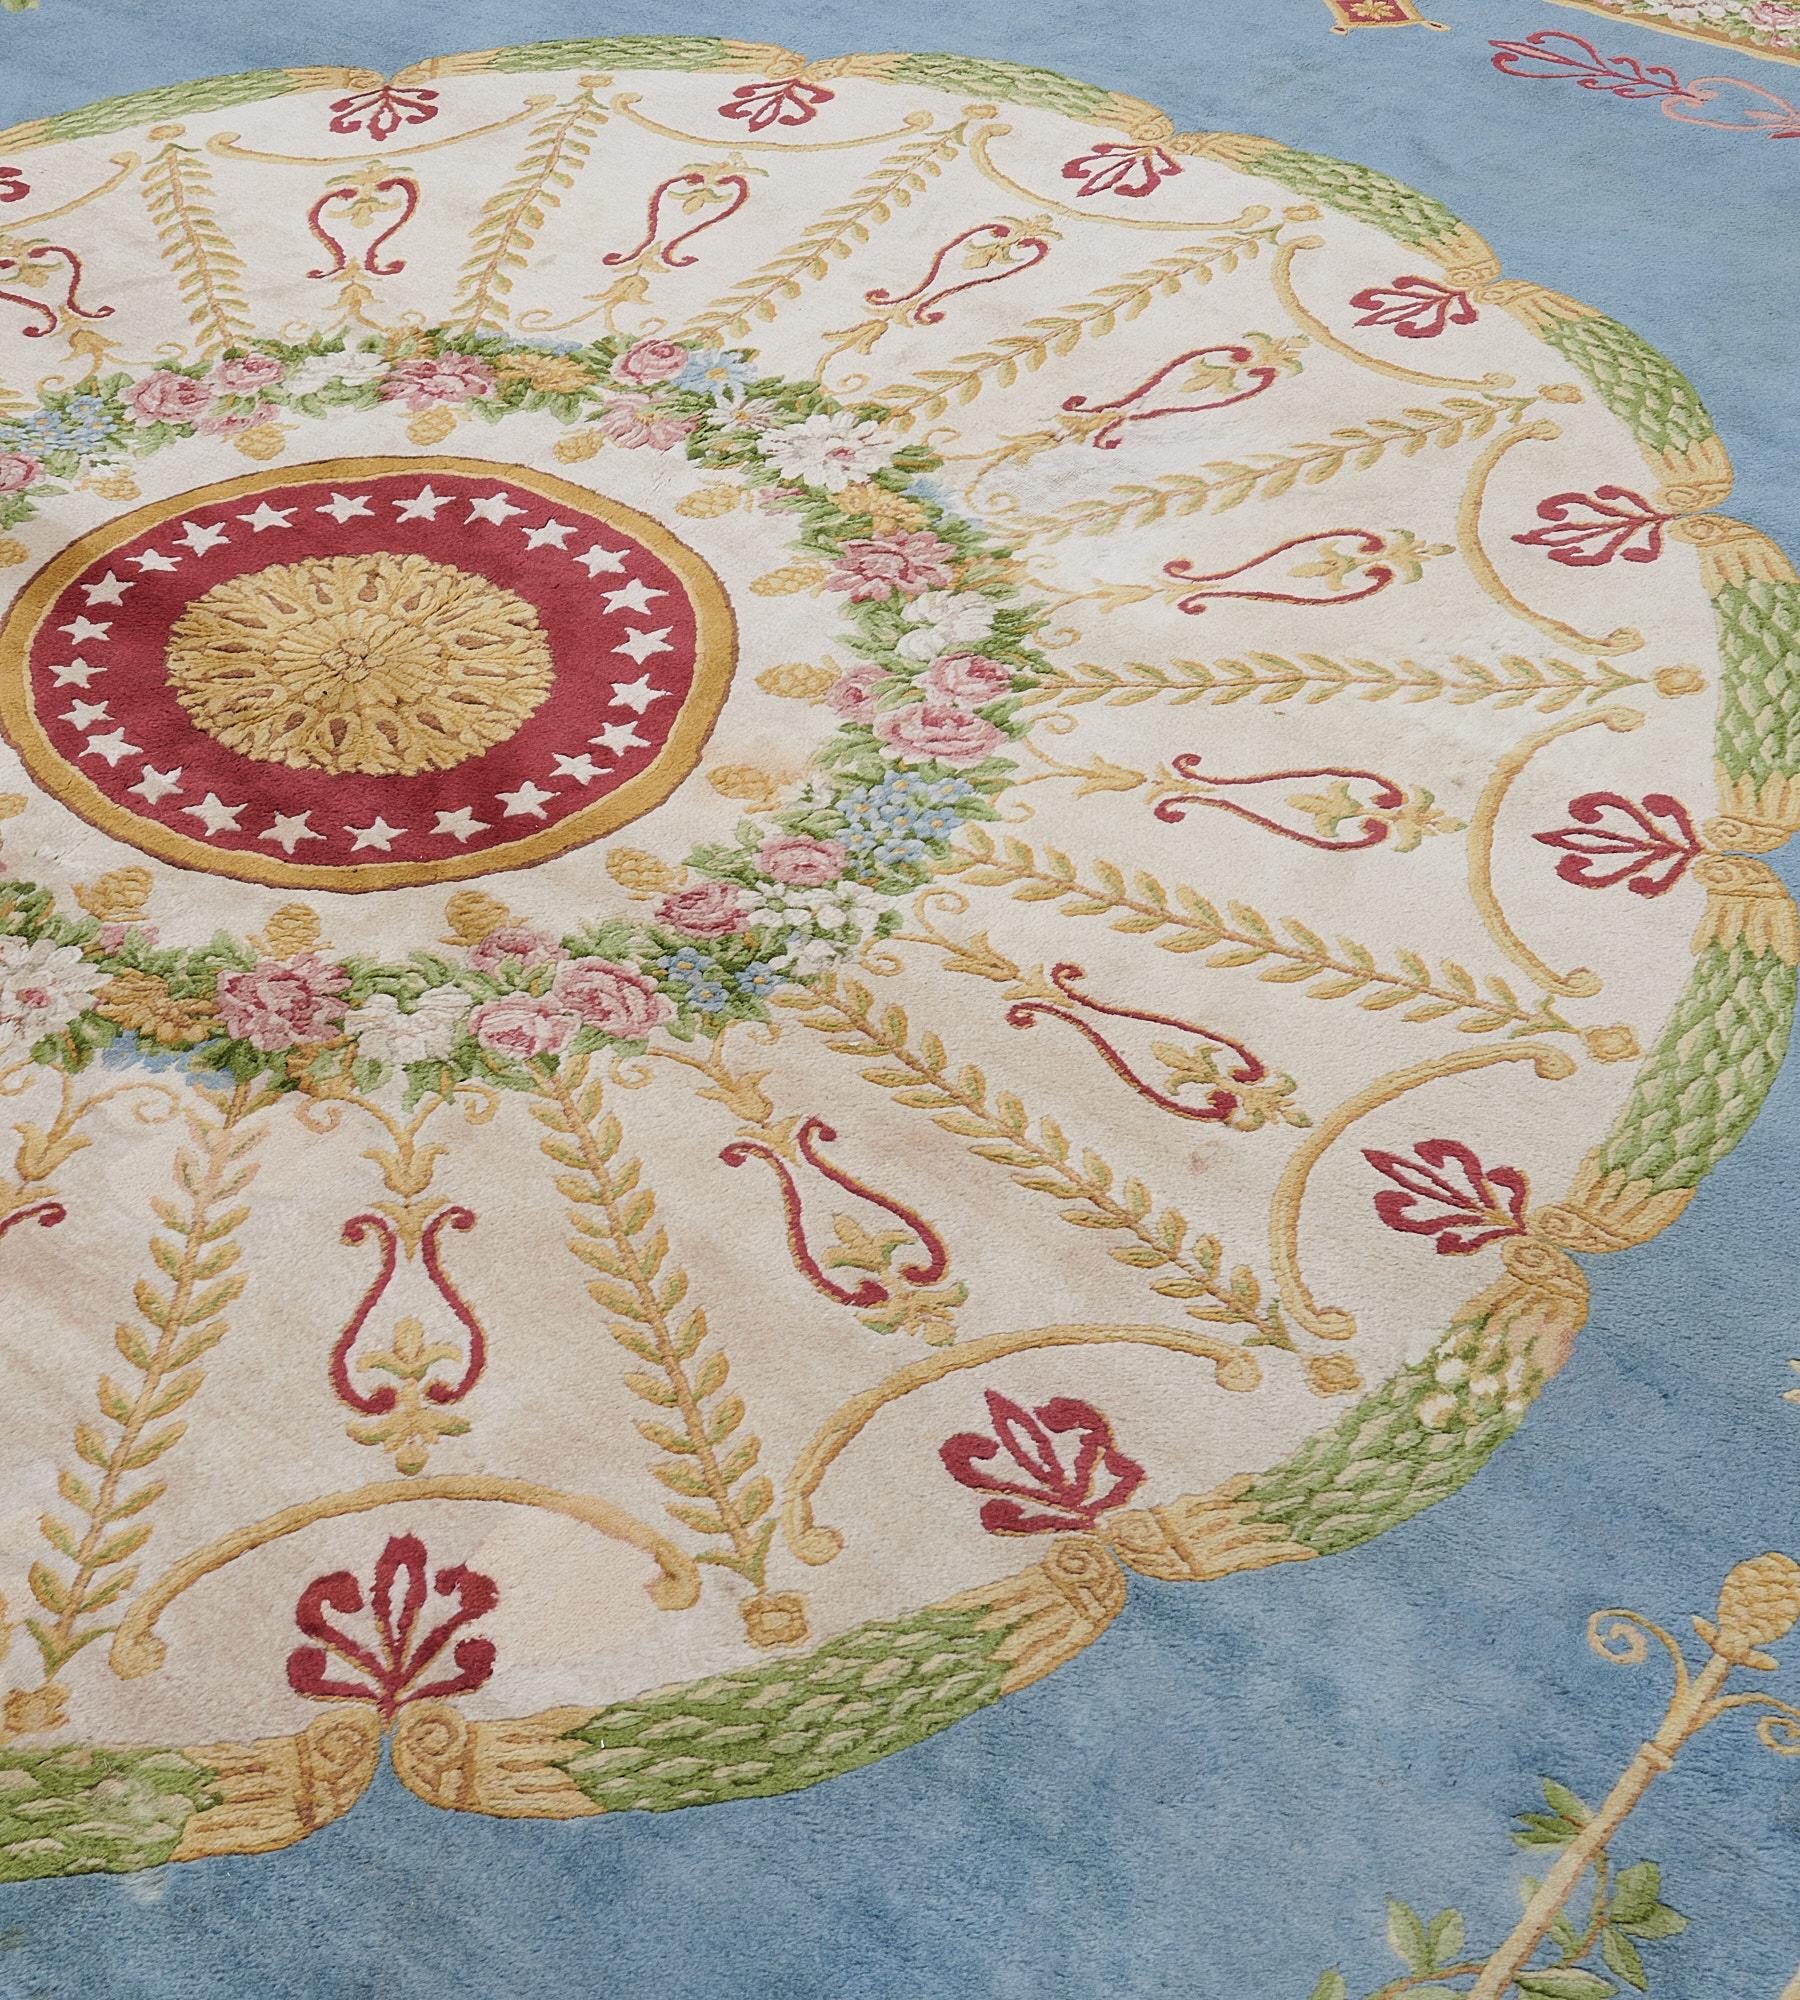 This Savonnerie rug has a sky-blue field with a large circular ivory roundel with a burgundy-red central roundel with a gold acanthus leaf centre enclosed within by a band of ivory stars and a gold outer band, surrounded by a delicate floral garland